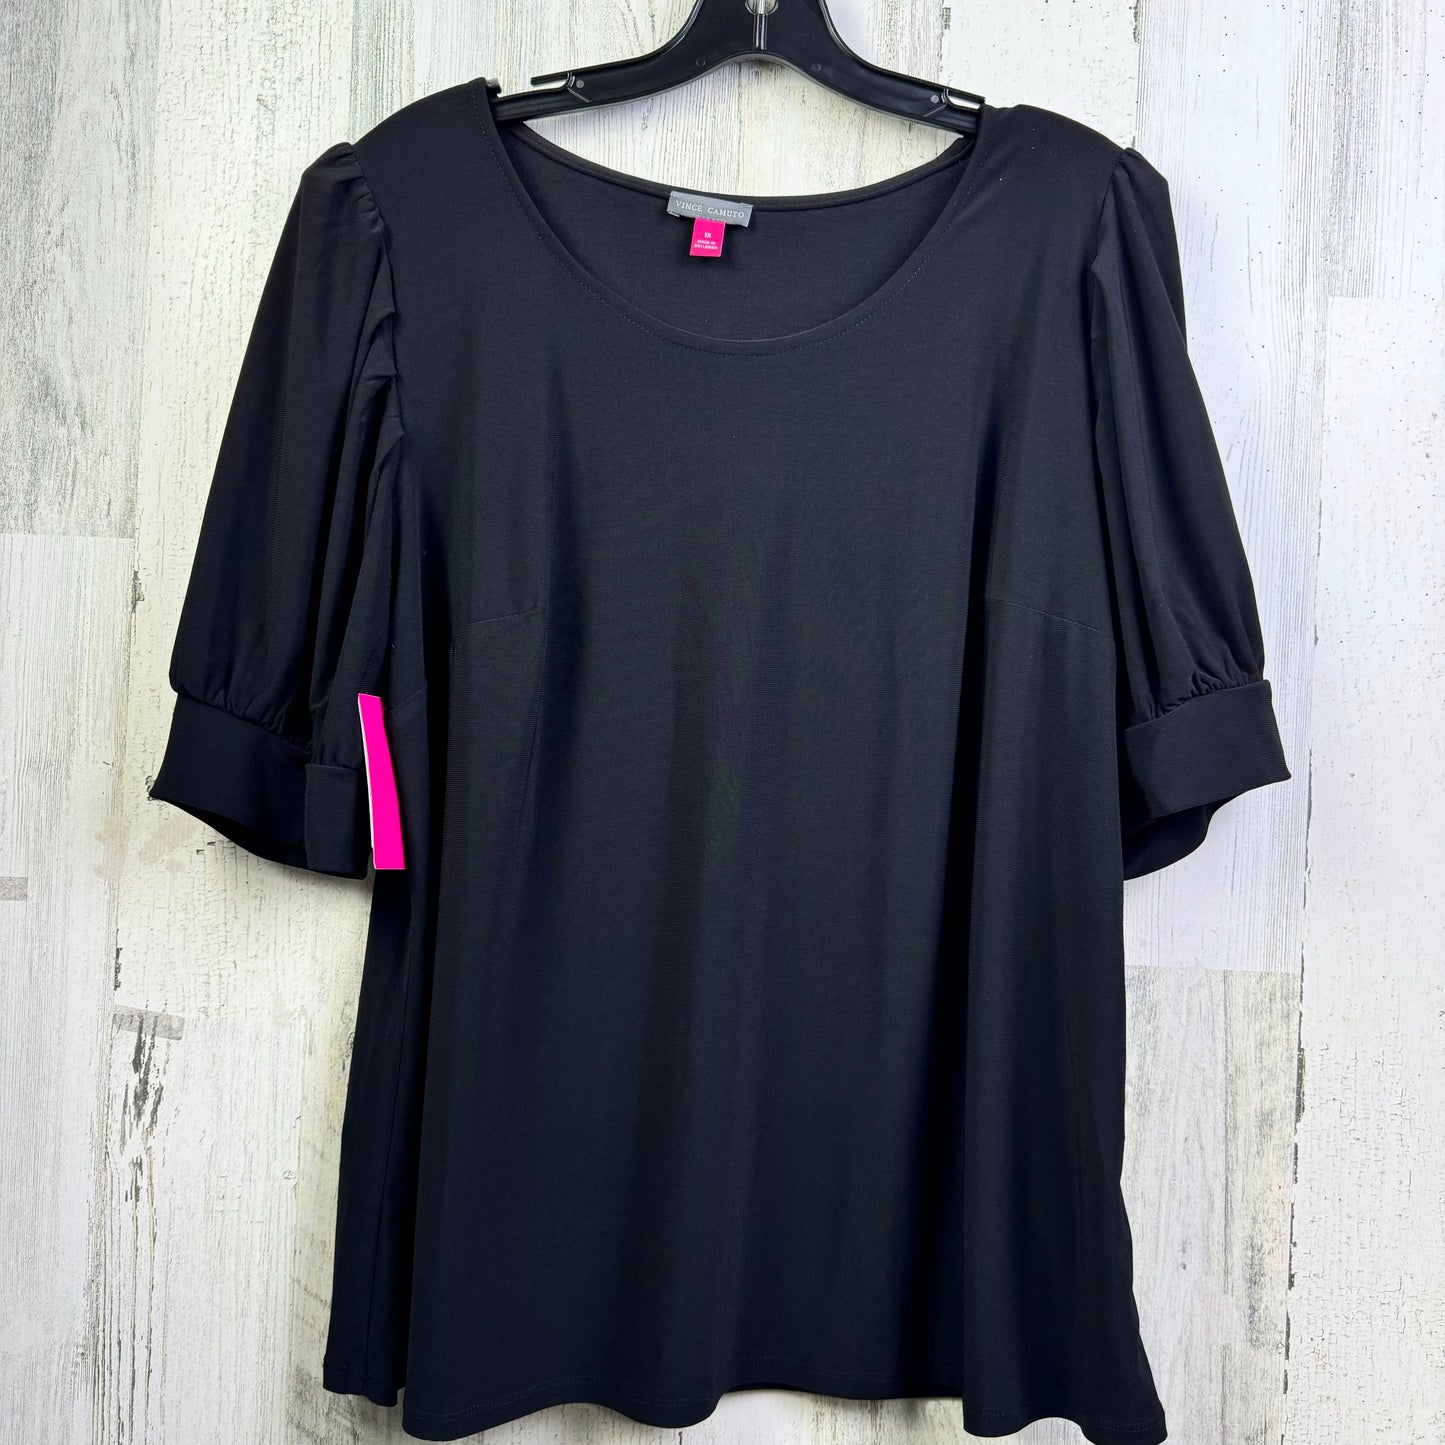 Black Top Short Sleeve Vince Camuto, Size 1x